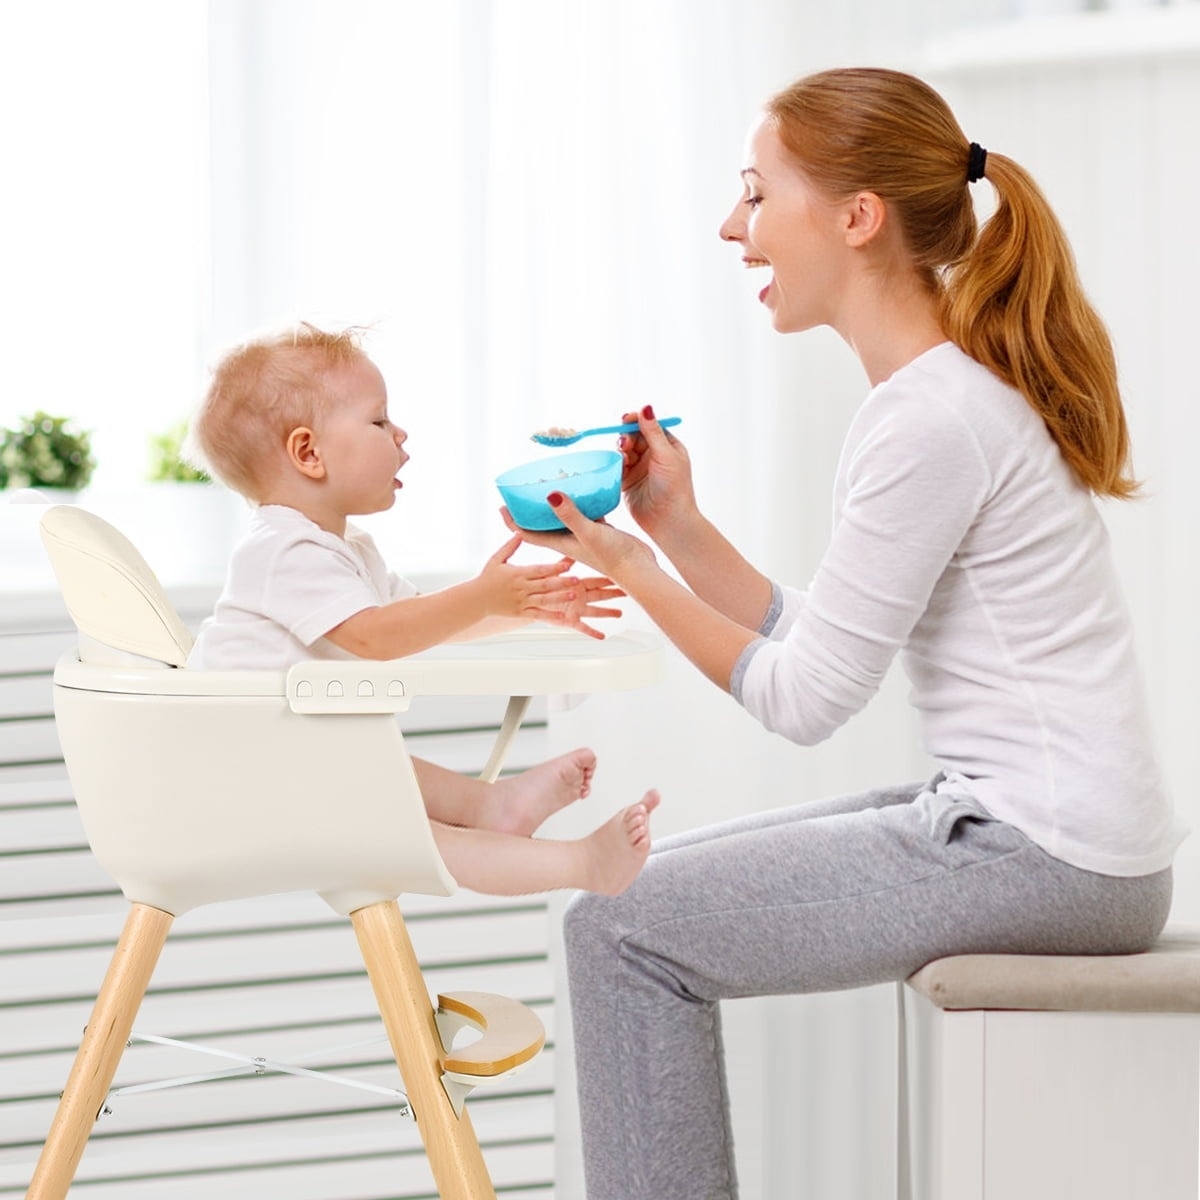 Adult feeds a child in a high chair